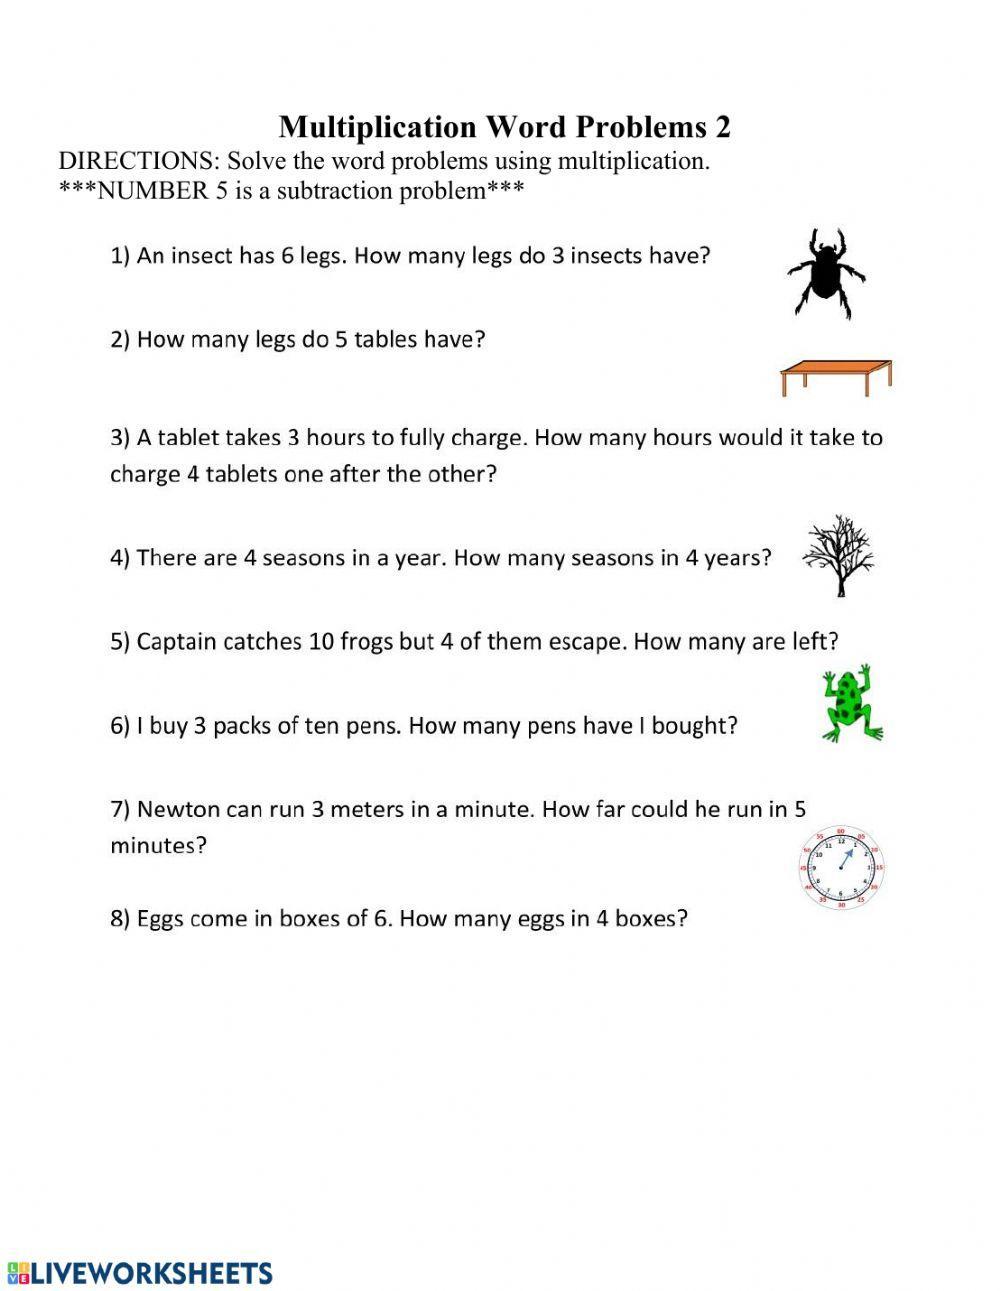 Multiplication Word Problems 2